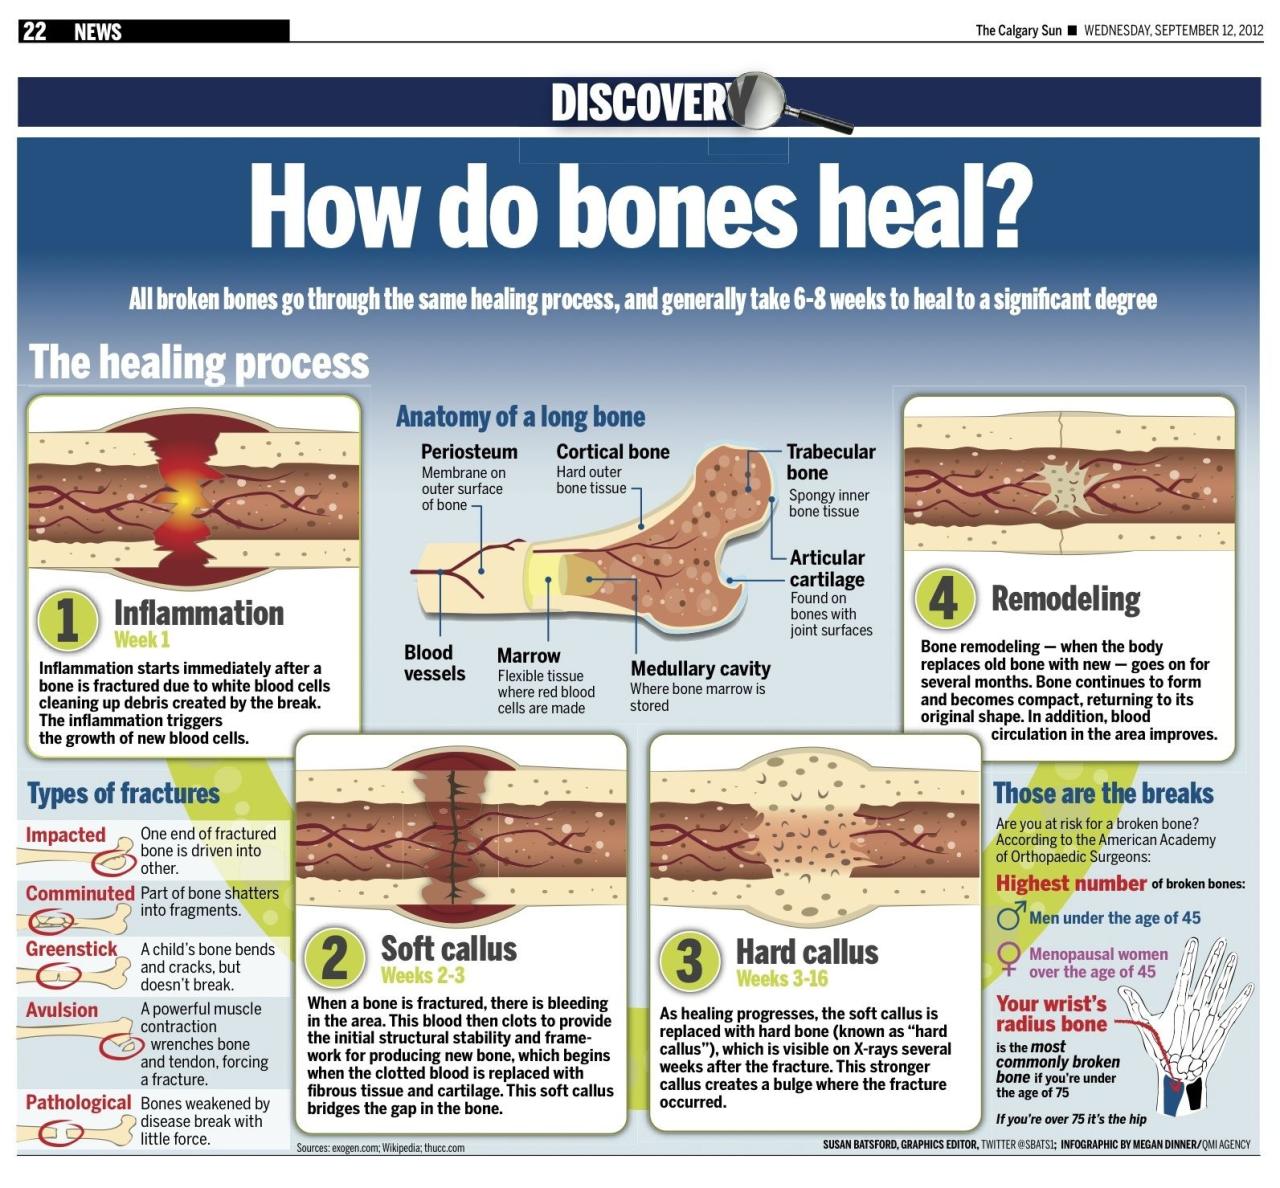 Healing bone fracture stress recovery process after broken heals during nsaids google graphic why